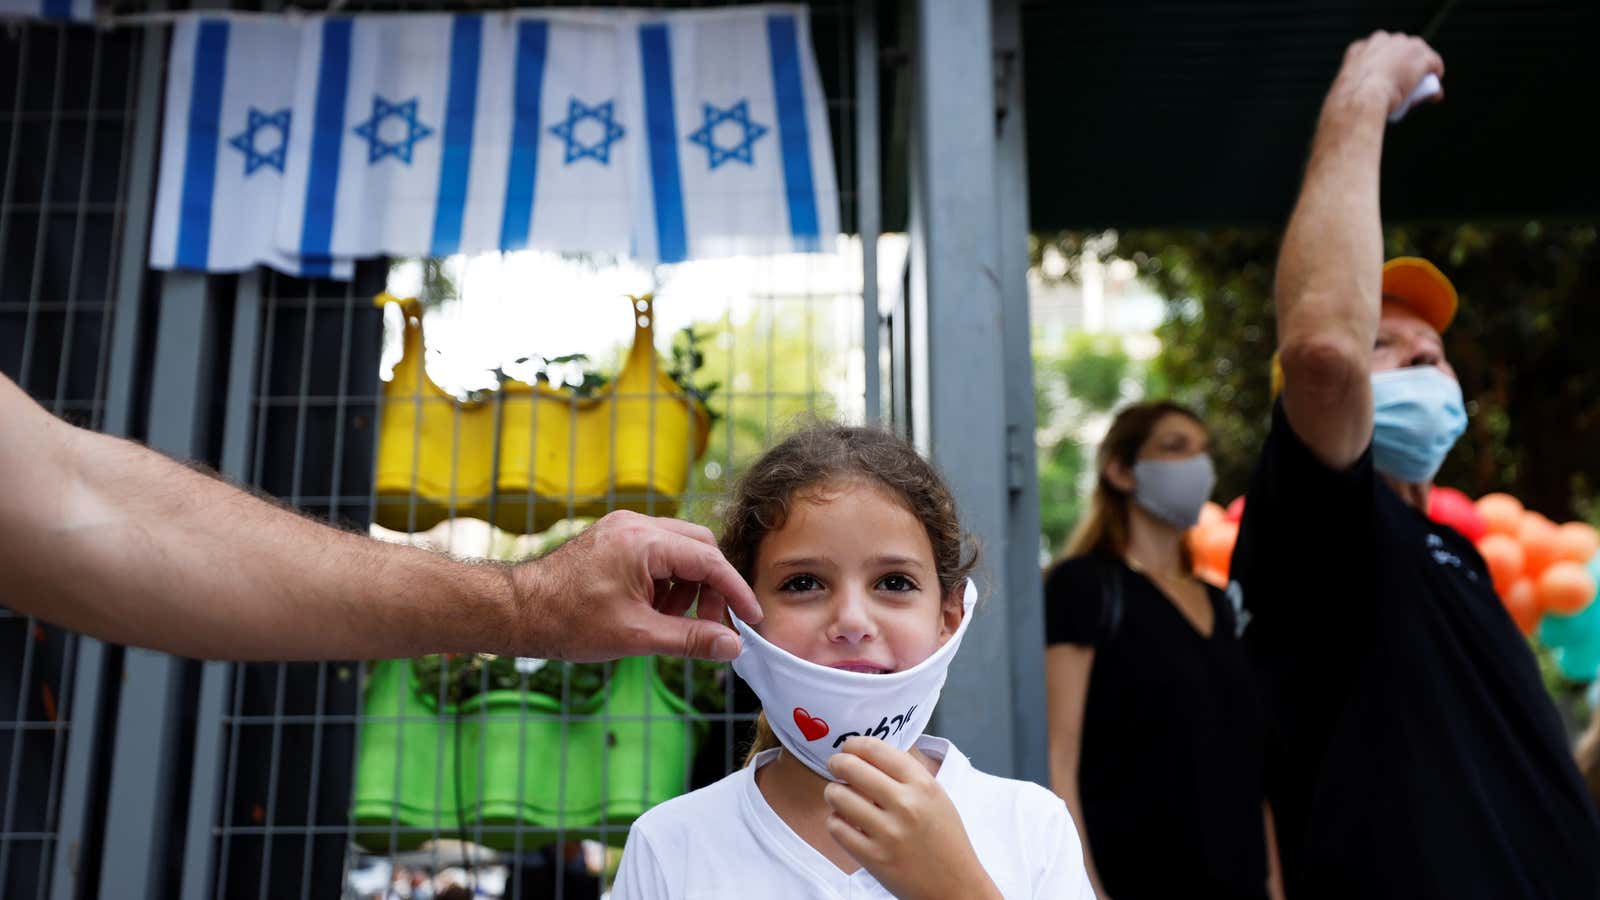 Israel’s schools have had to institute stricter rules to deal with the spike in Covid cases.